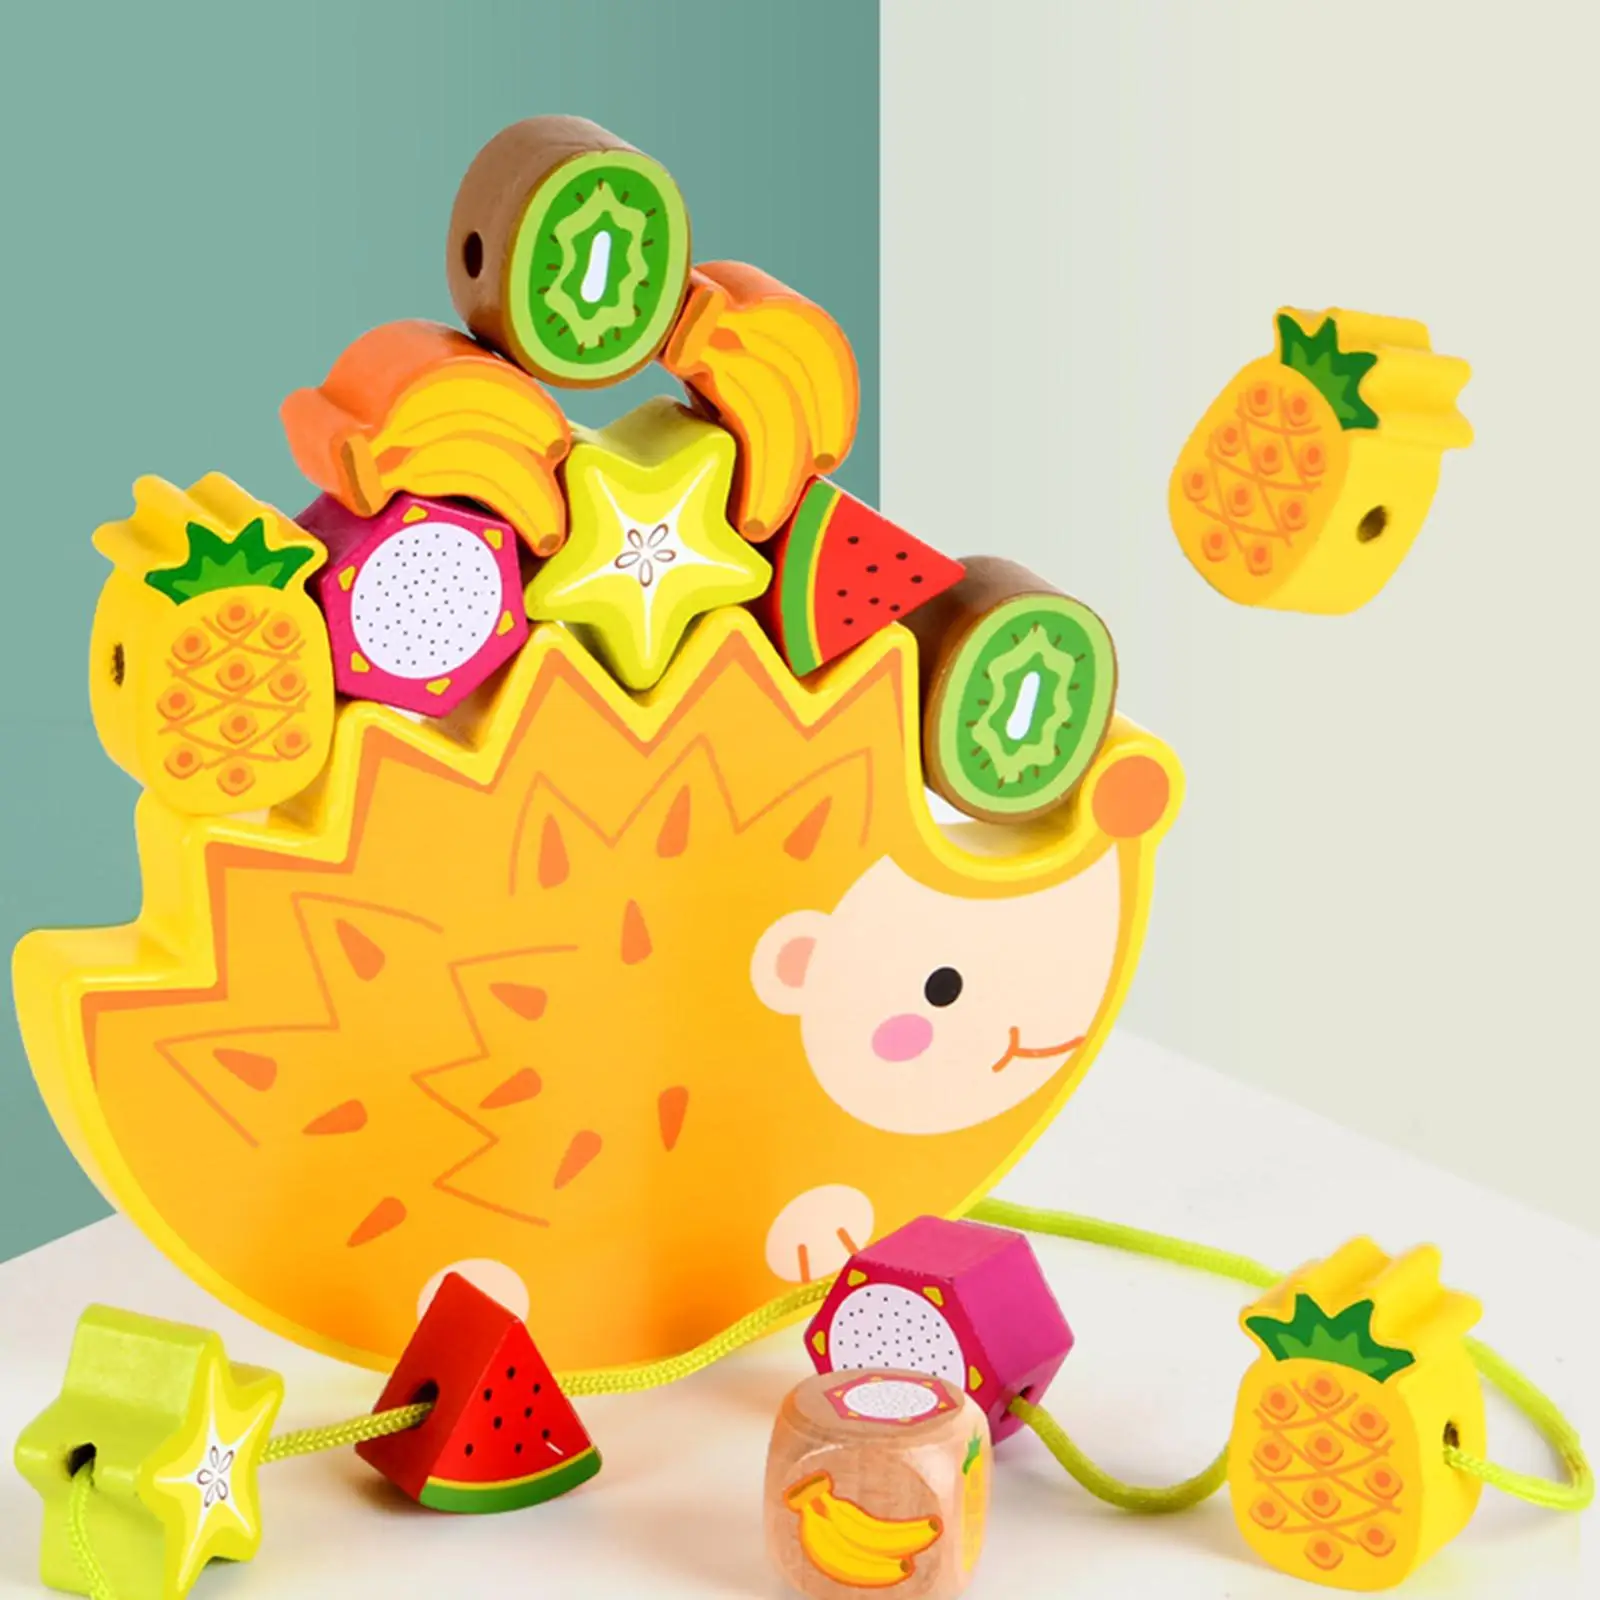 Hedgehog Fruit Baby Stacking Blocks Wooden Balance Early Cognition Toys Building Blocks for Children Kids Toddlers Birthday Gift